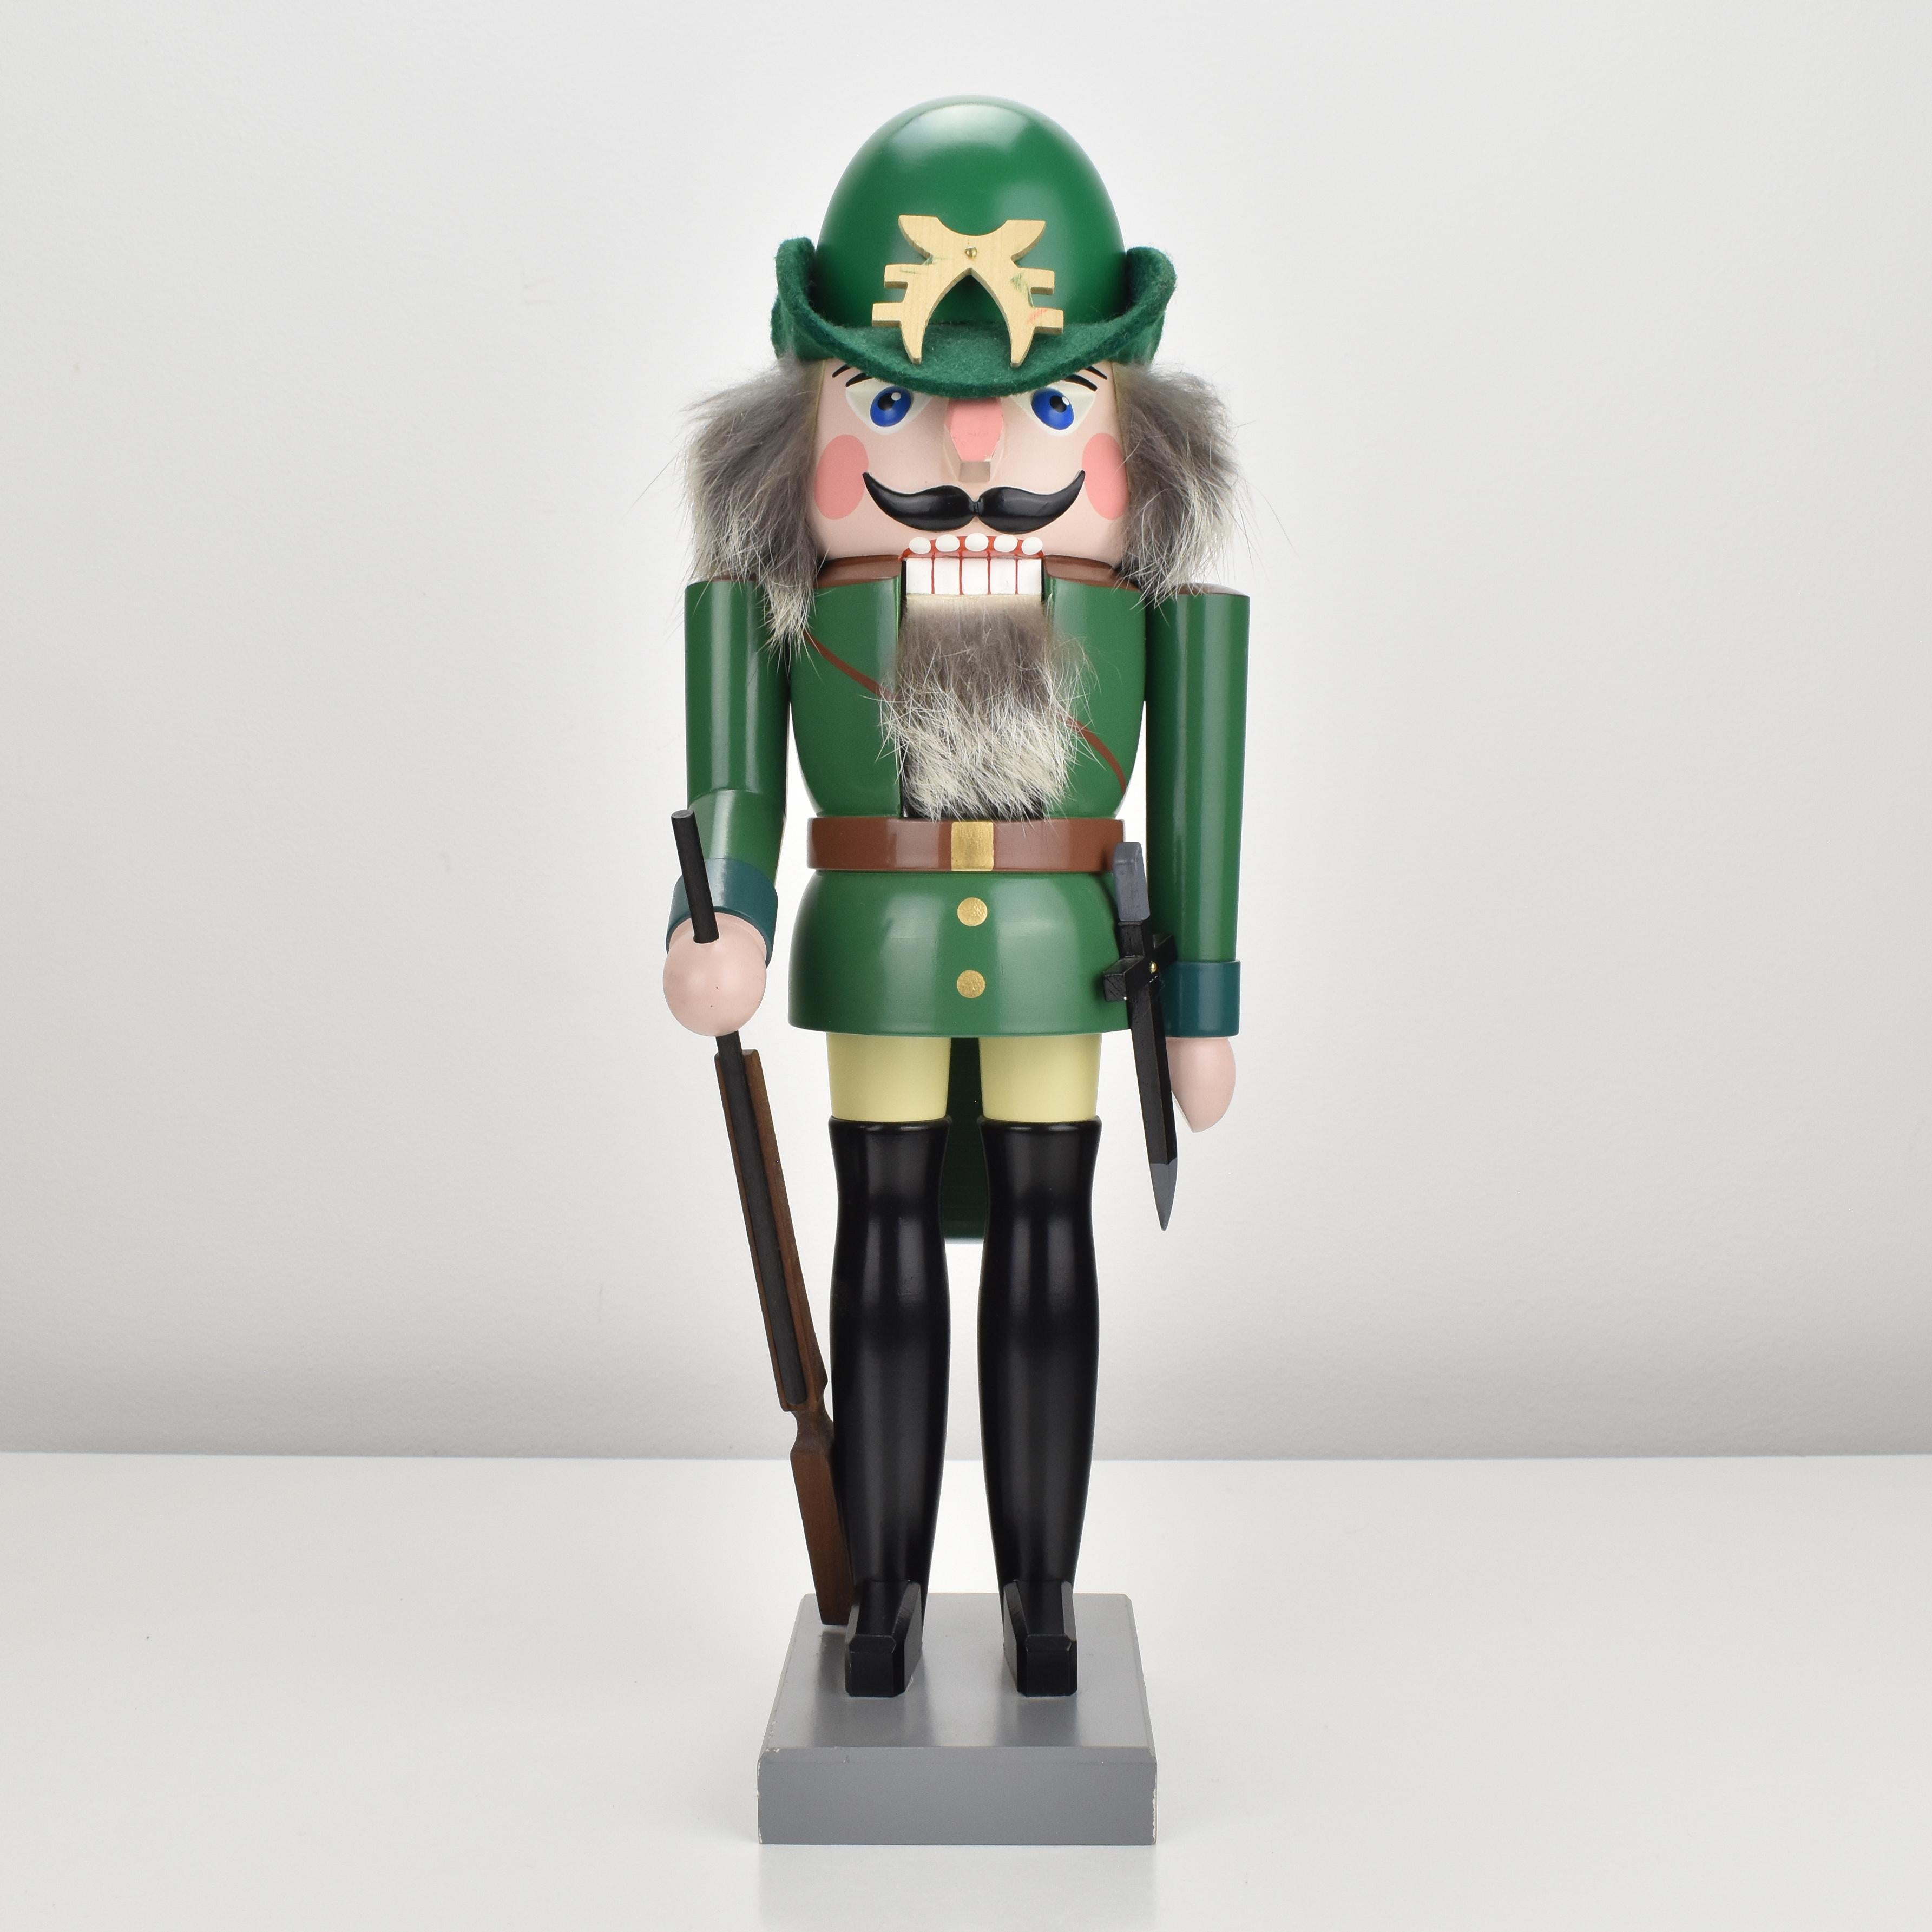 A vintage nutcracker from the Erzgebirge region, in shape of a hunter made of turned wood and painted in vibrant colors, dating back to the 1970s. This piece is made by the famous manufacturer Füchtner and is marked on the base as also handsigned by